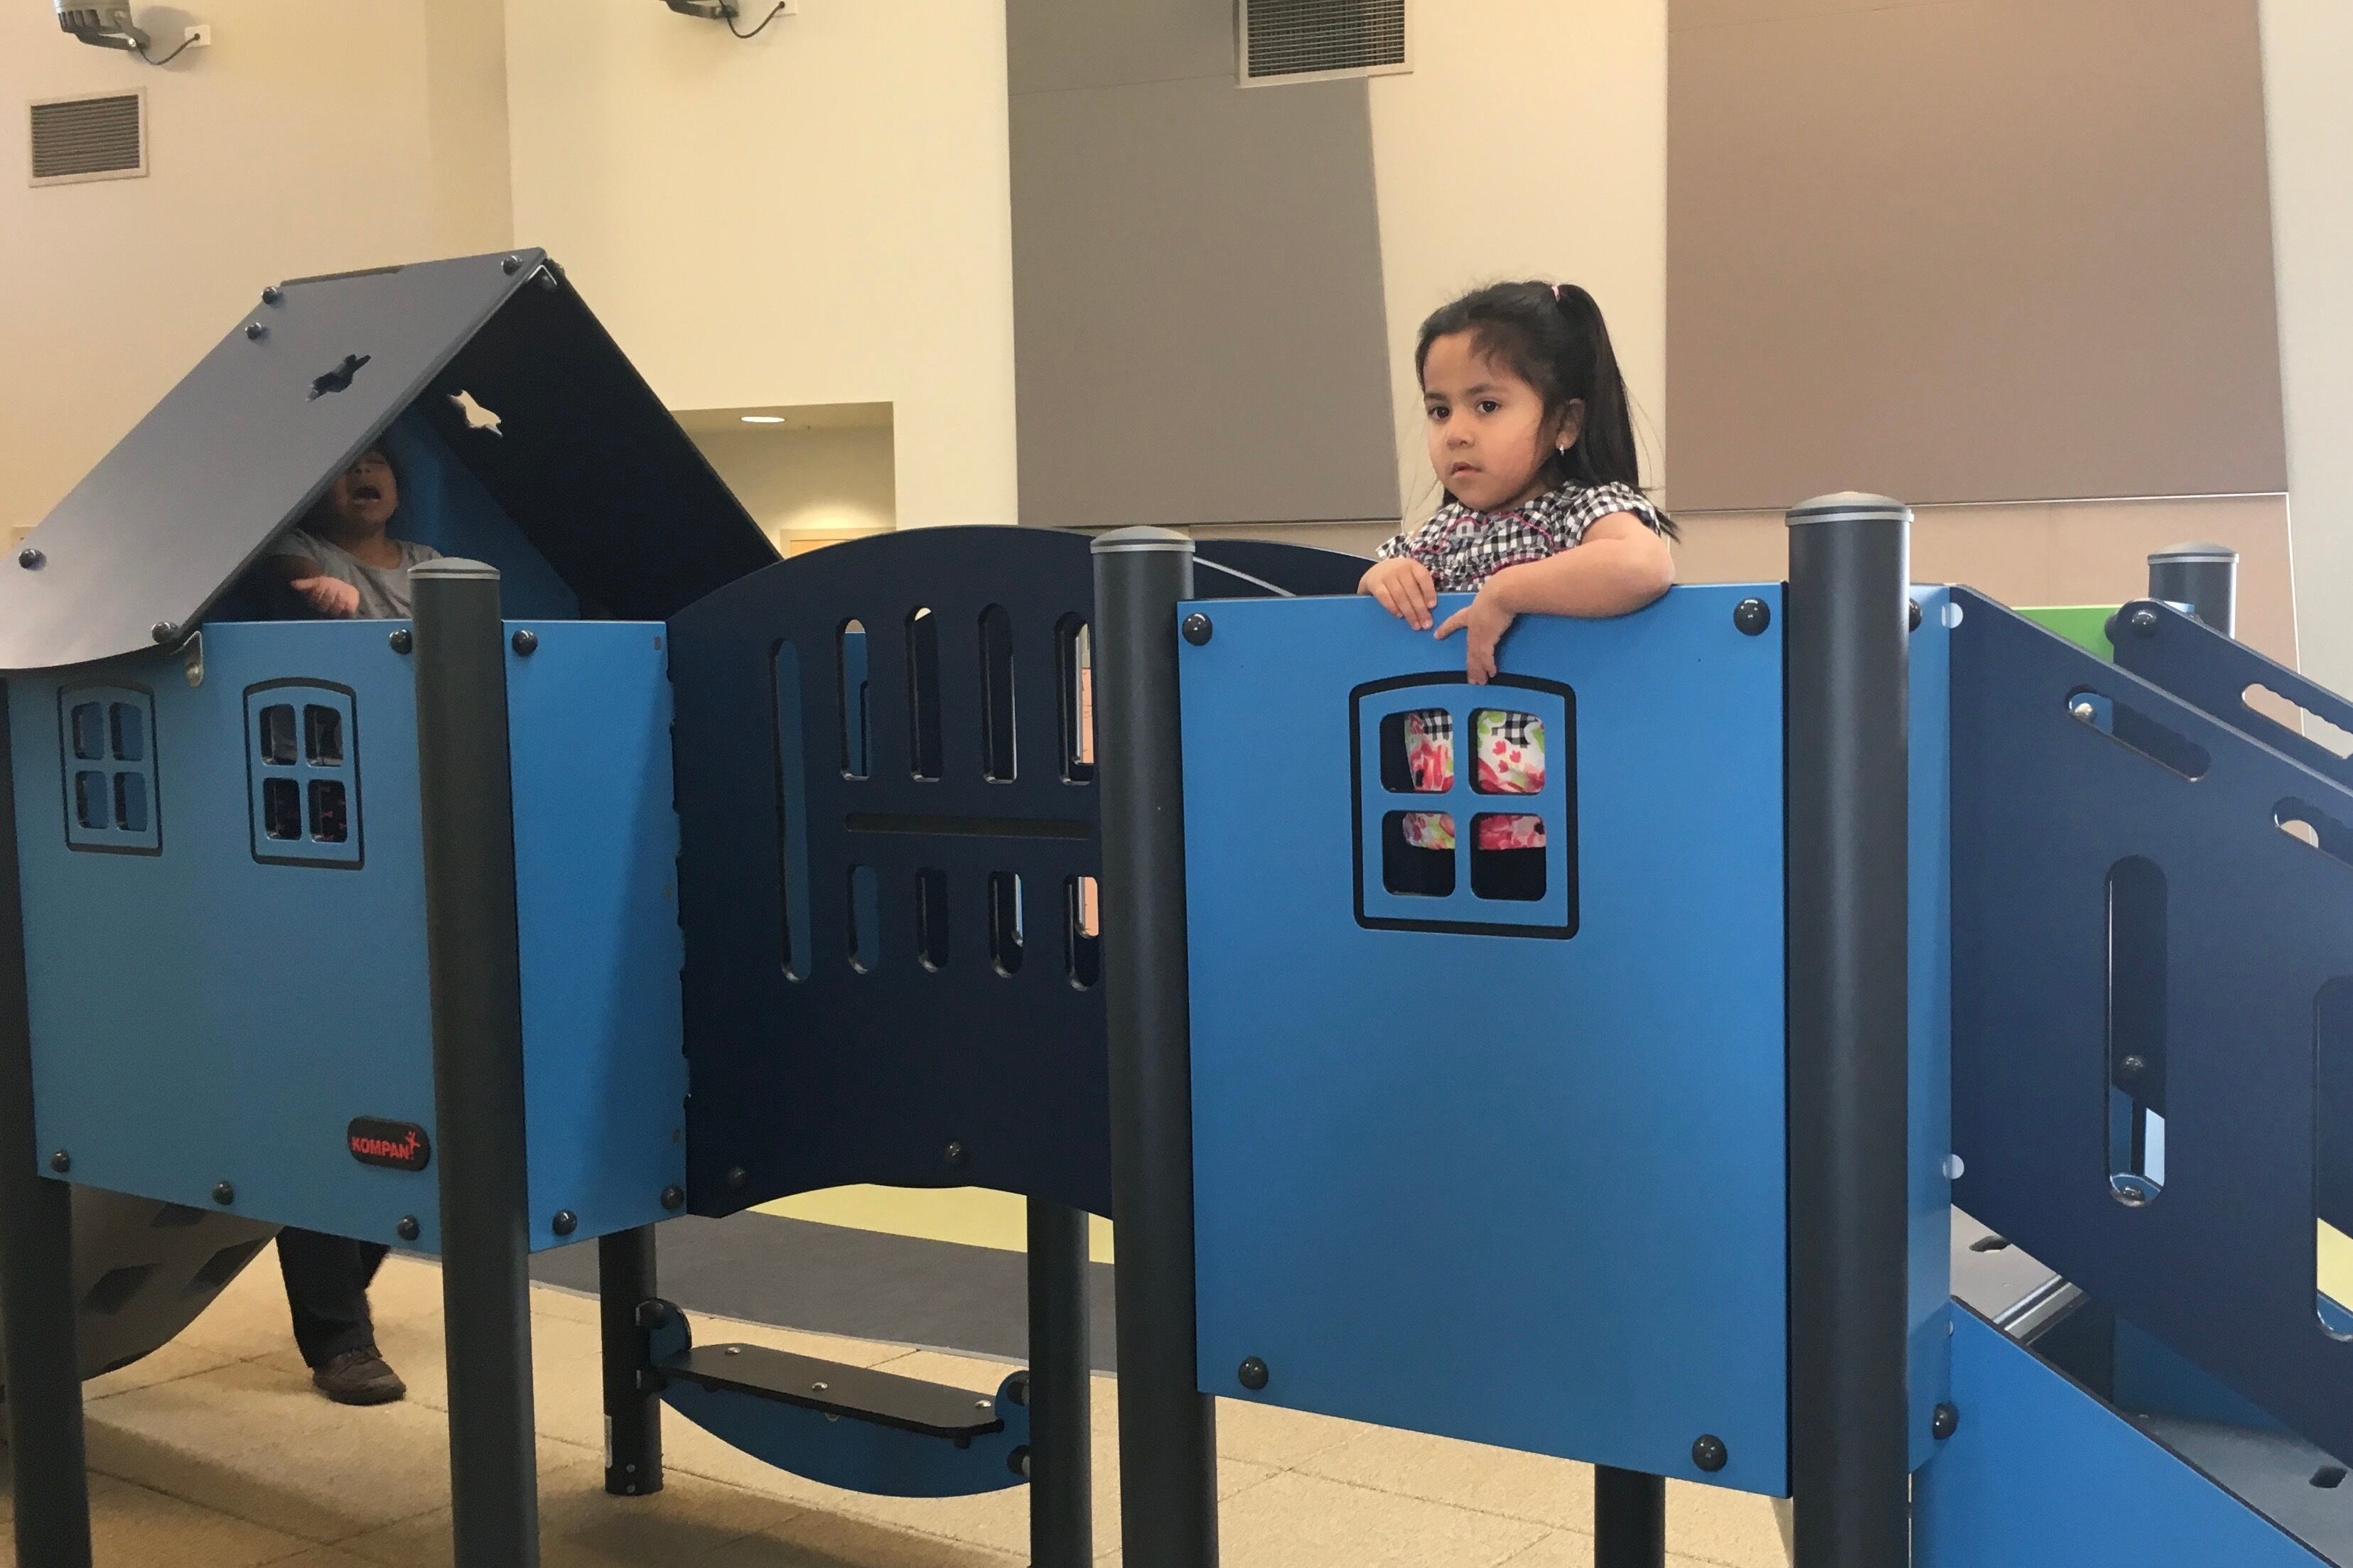 A preschool girl stand on top of a blue indoor play structure